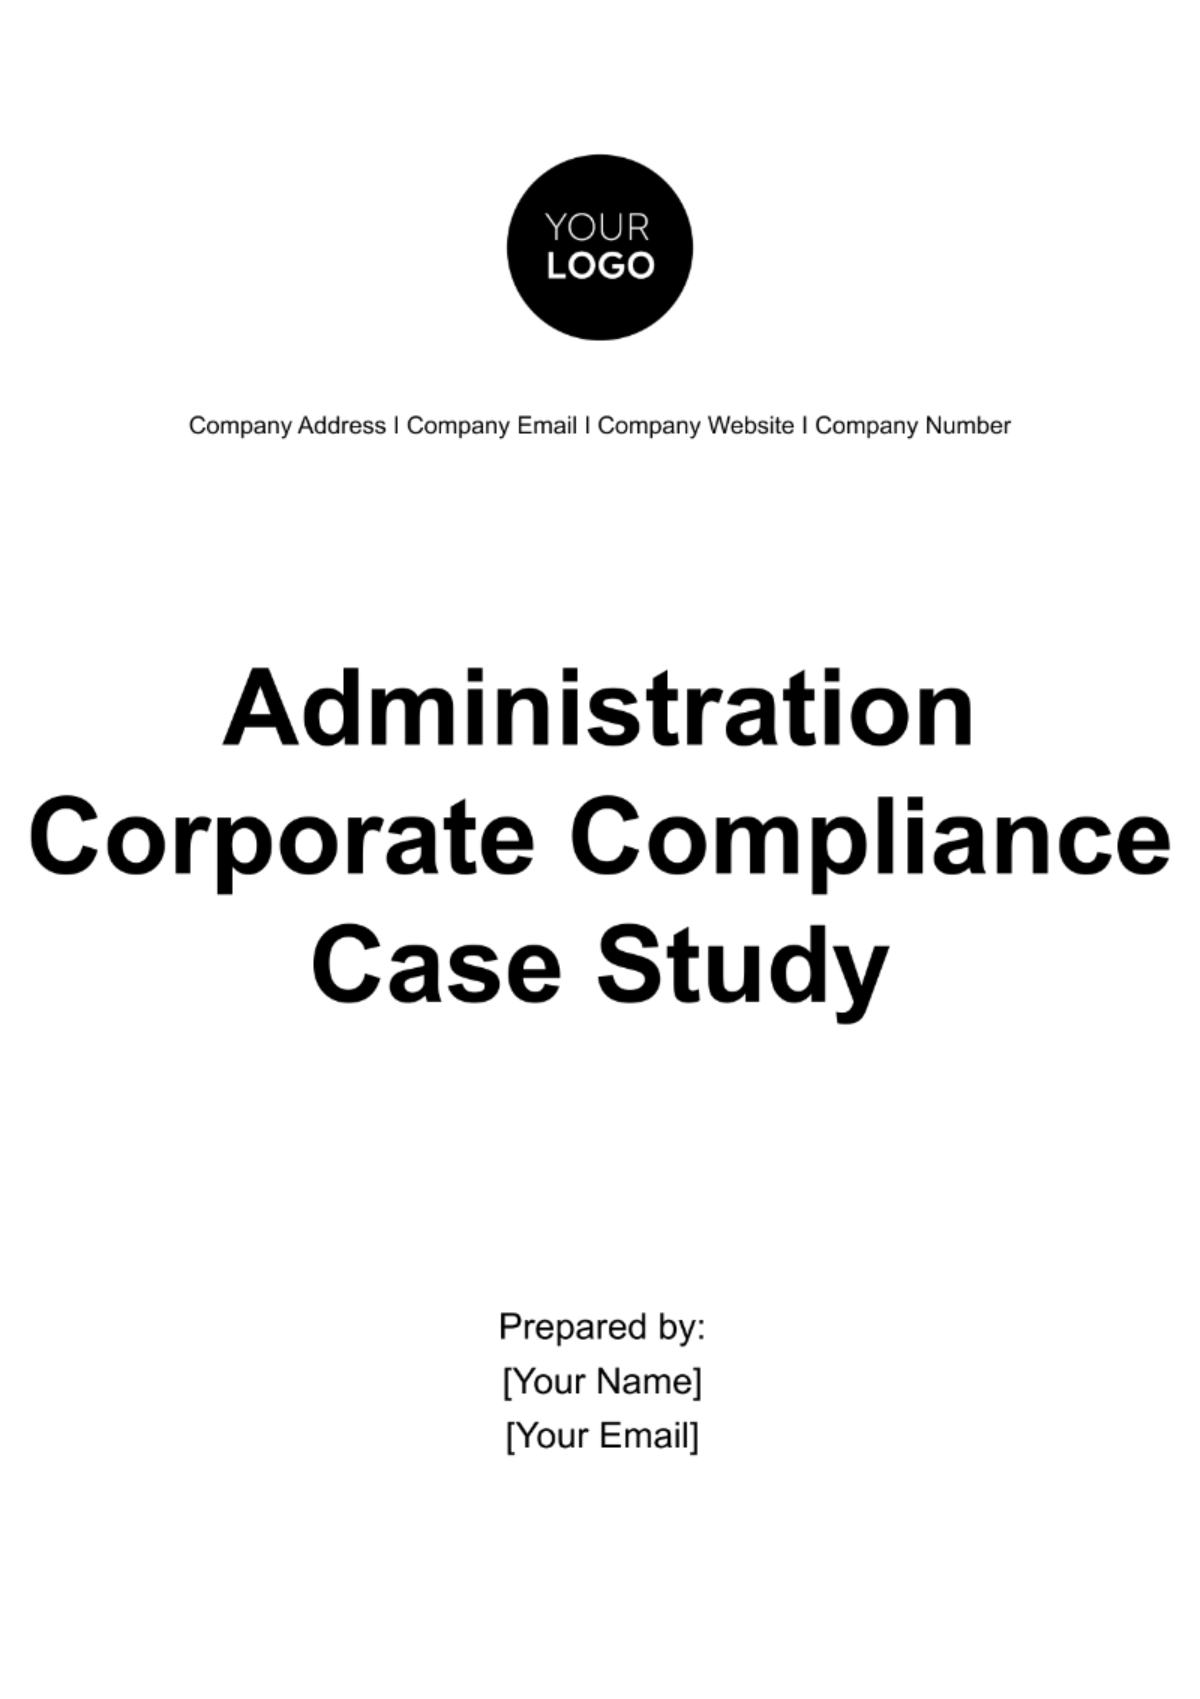 Administration Corporate Compliance Case Study Template